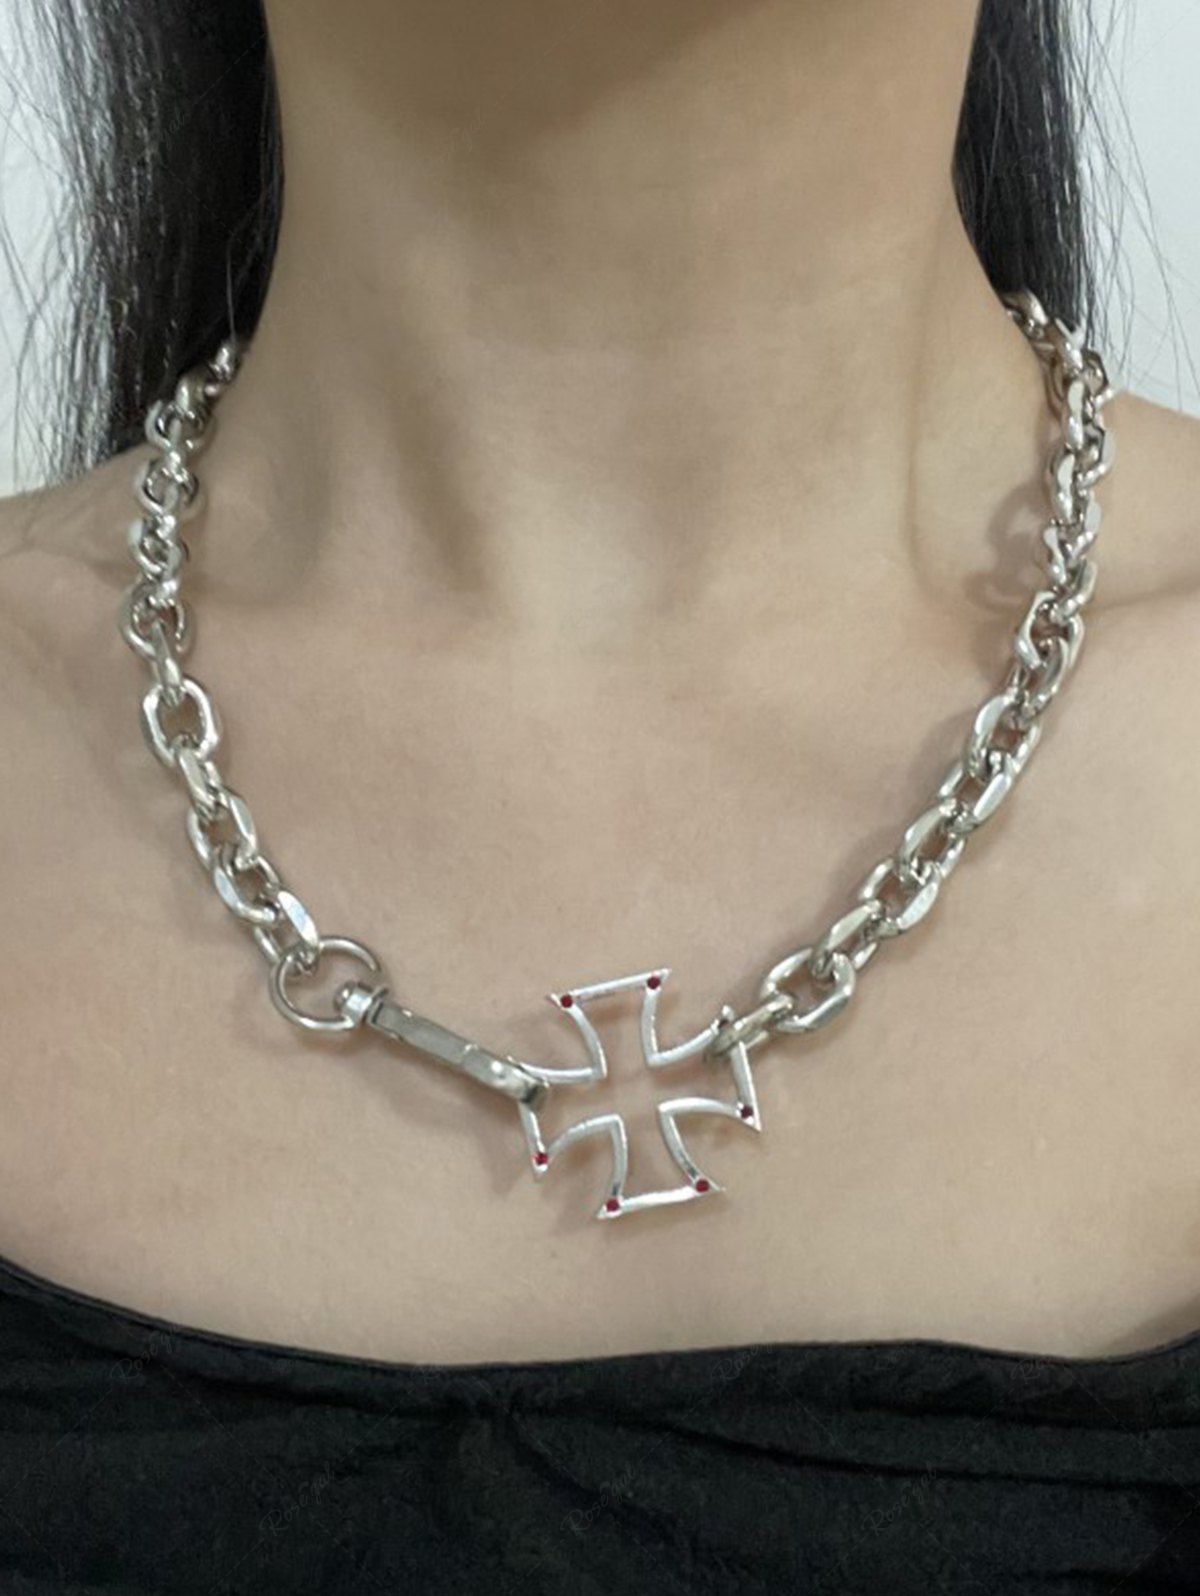 Dervivea Punk Necklace with Curb Chain Accent Cross Pendant Choker Silver Chunky  Chain Gothic Faith Cross Necklace Jewellery for Women Teen Girls :  Amazon.com.au: Clothing, Shoes & Accessories